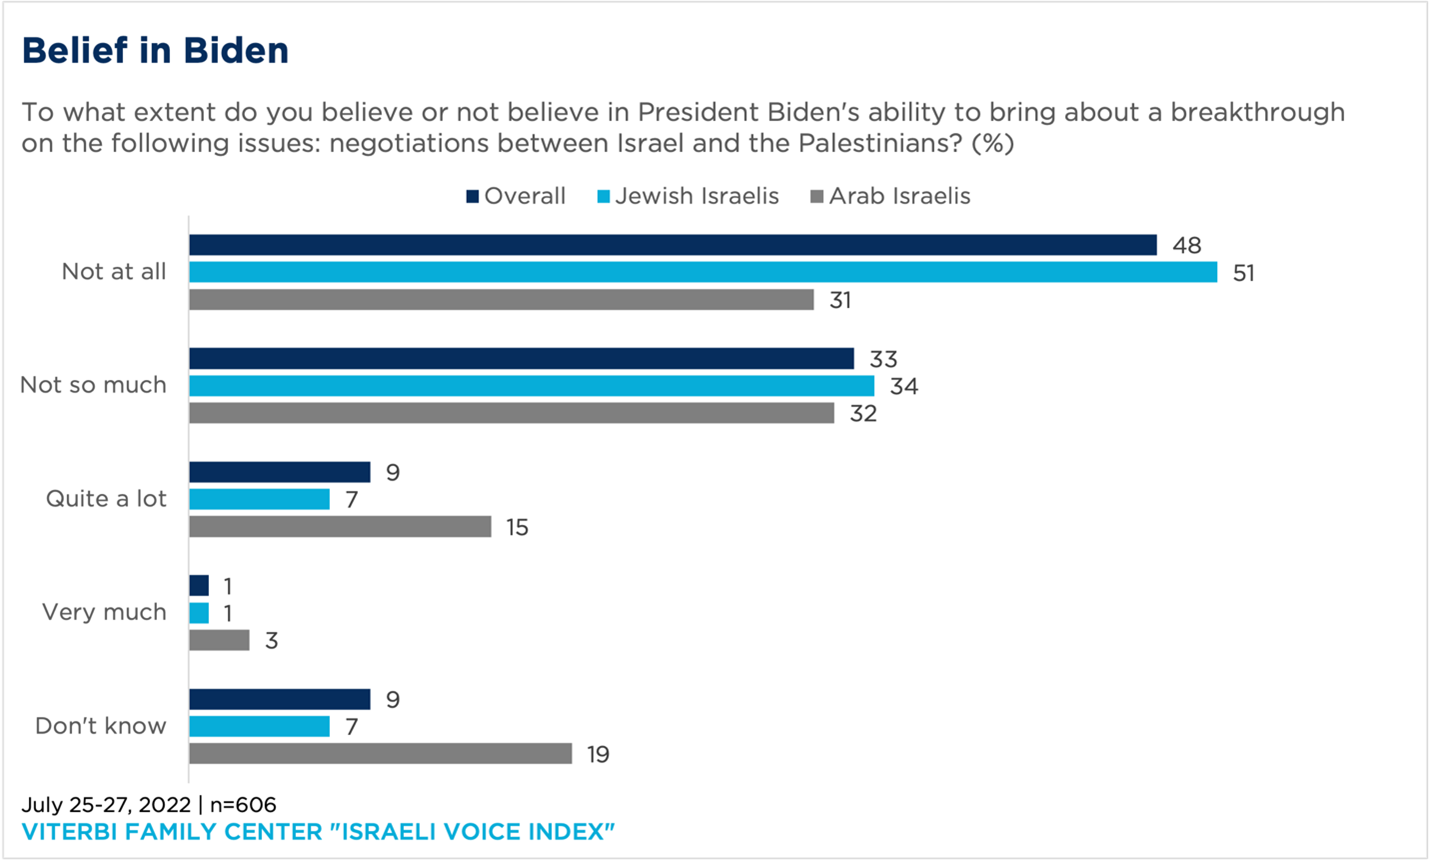 "bar chart showing beliefs on if President Biden can bring about a breakthrough in negotiations between Israelis and Palestinians""